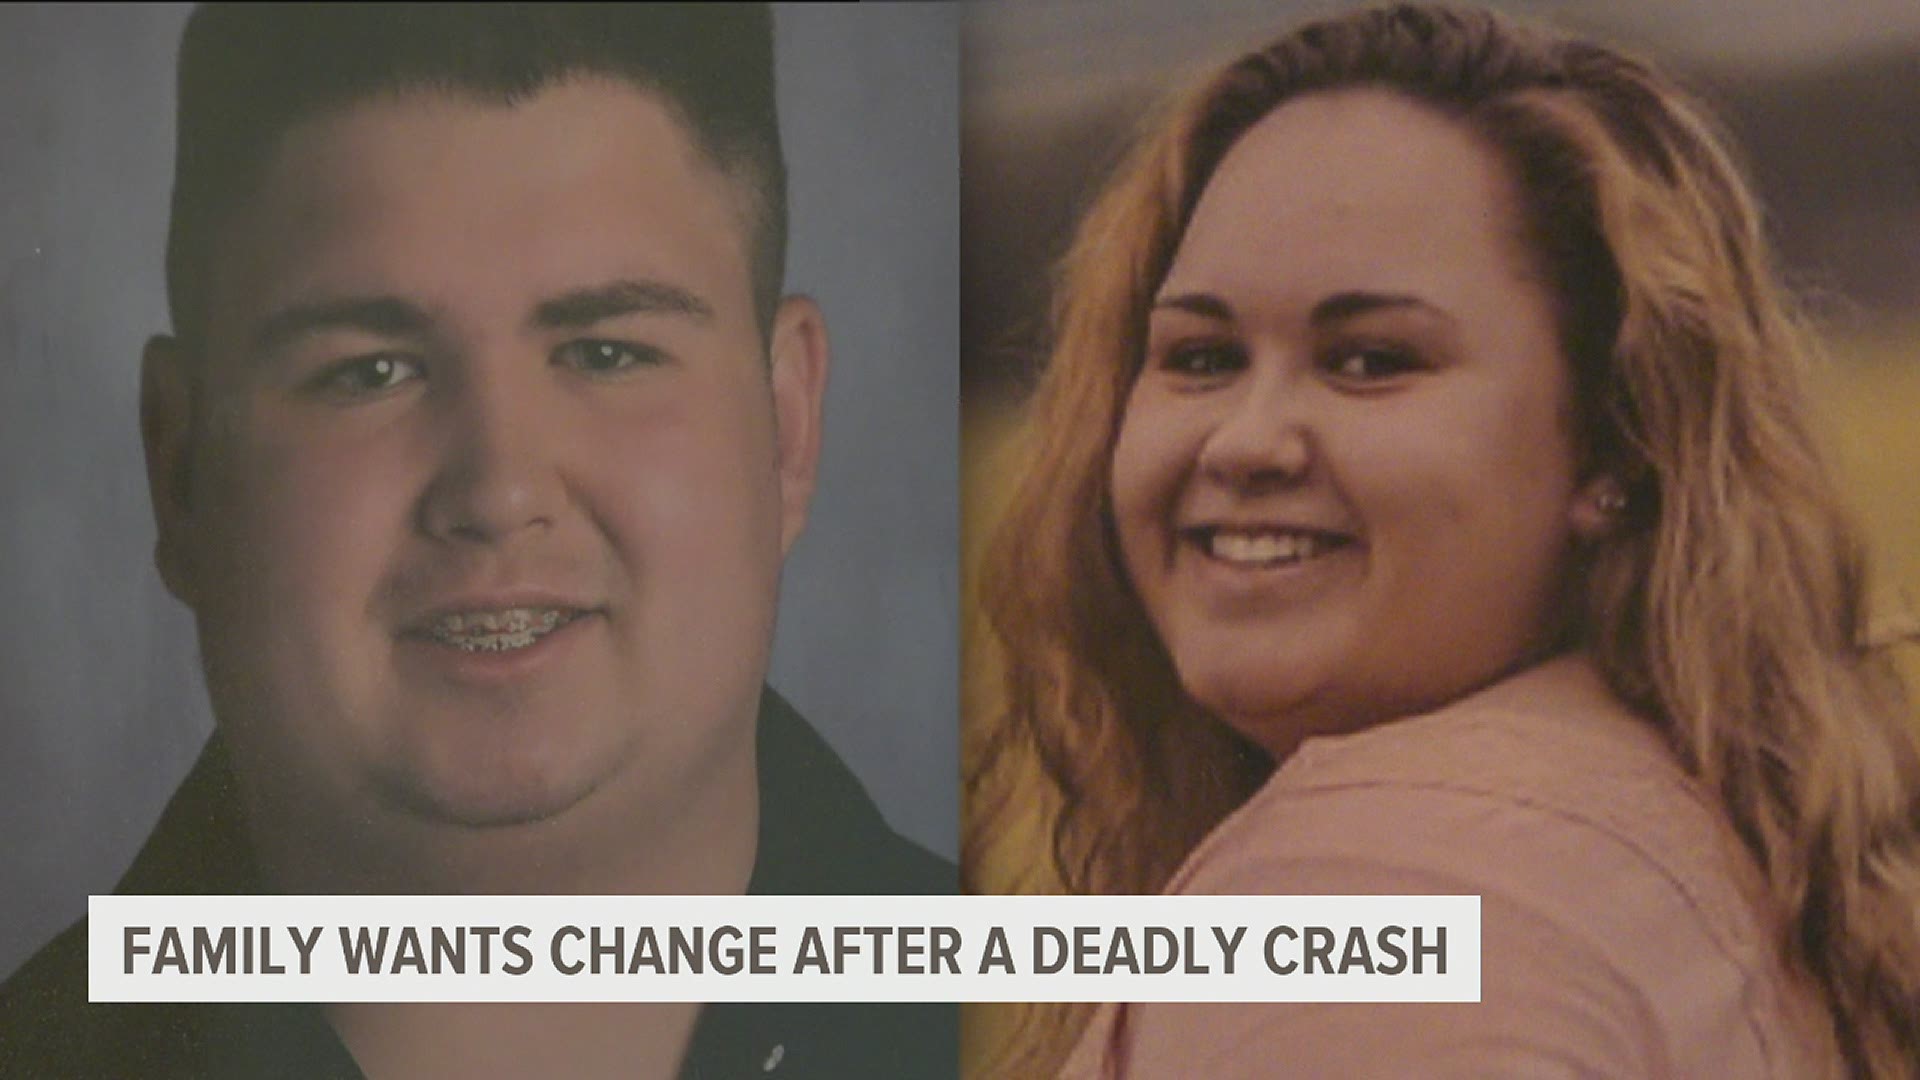 Brandie Kasper, 21, and her brother, Lenny, 18, died in a car crash in East Petersburg. Their family believes a longer delay at the stoplight would have saved them